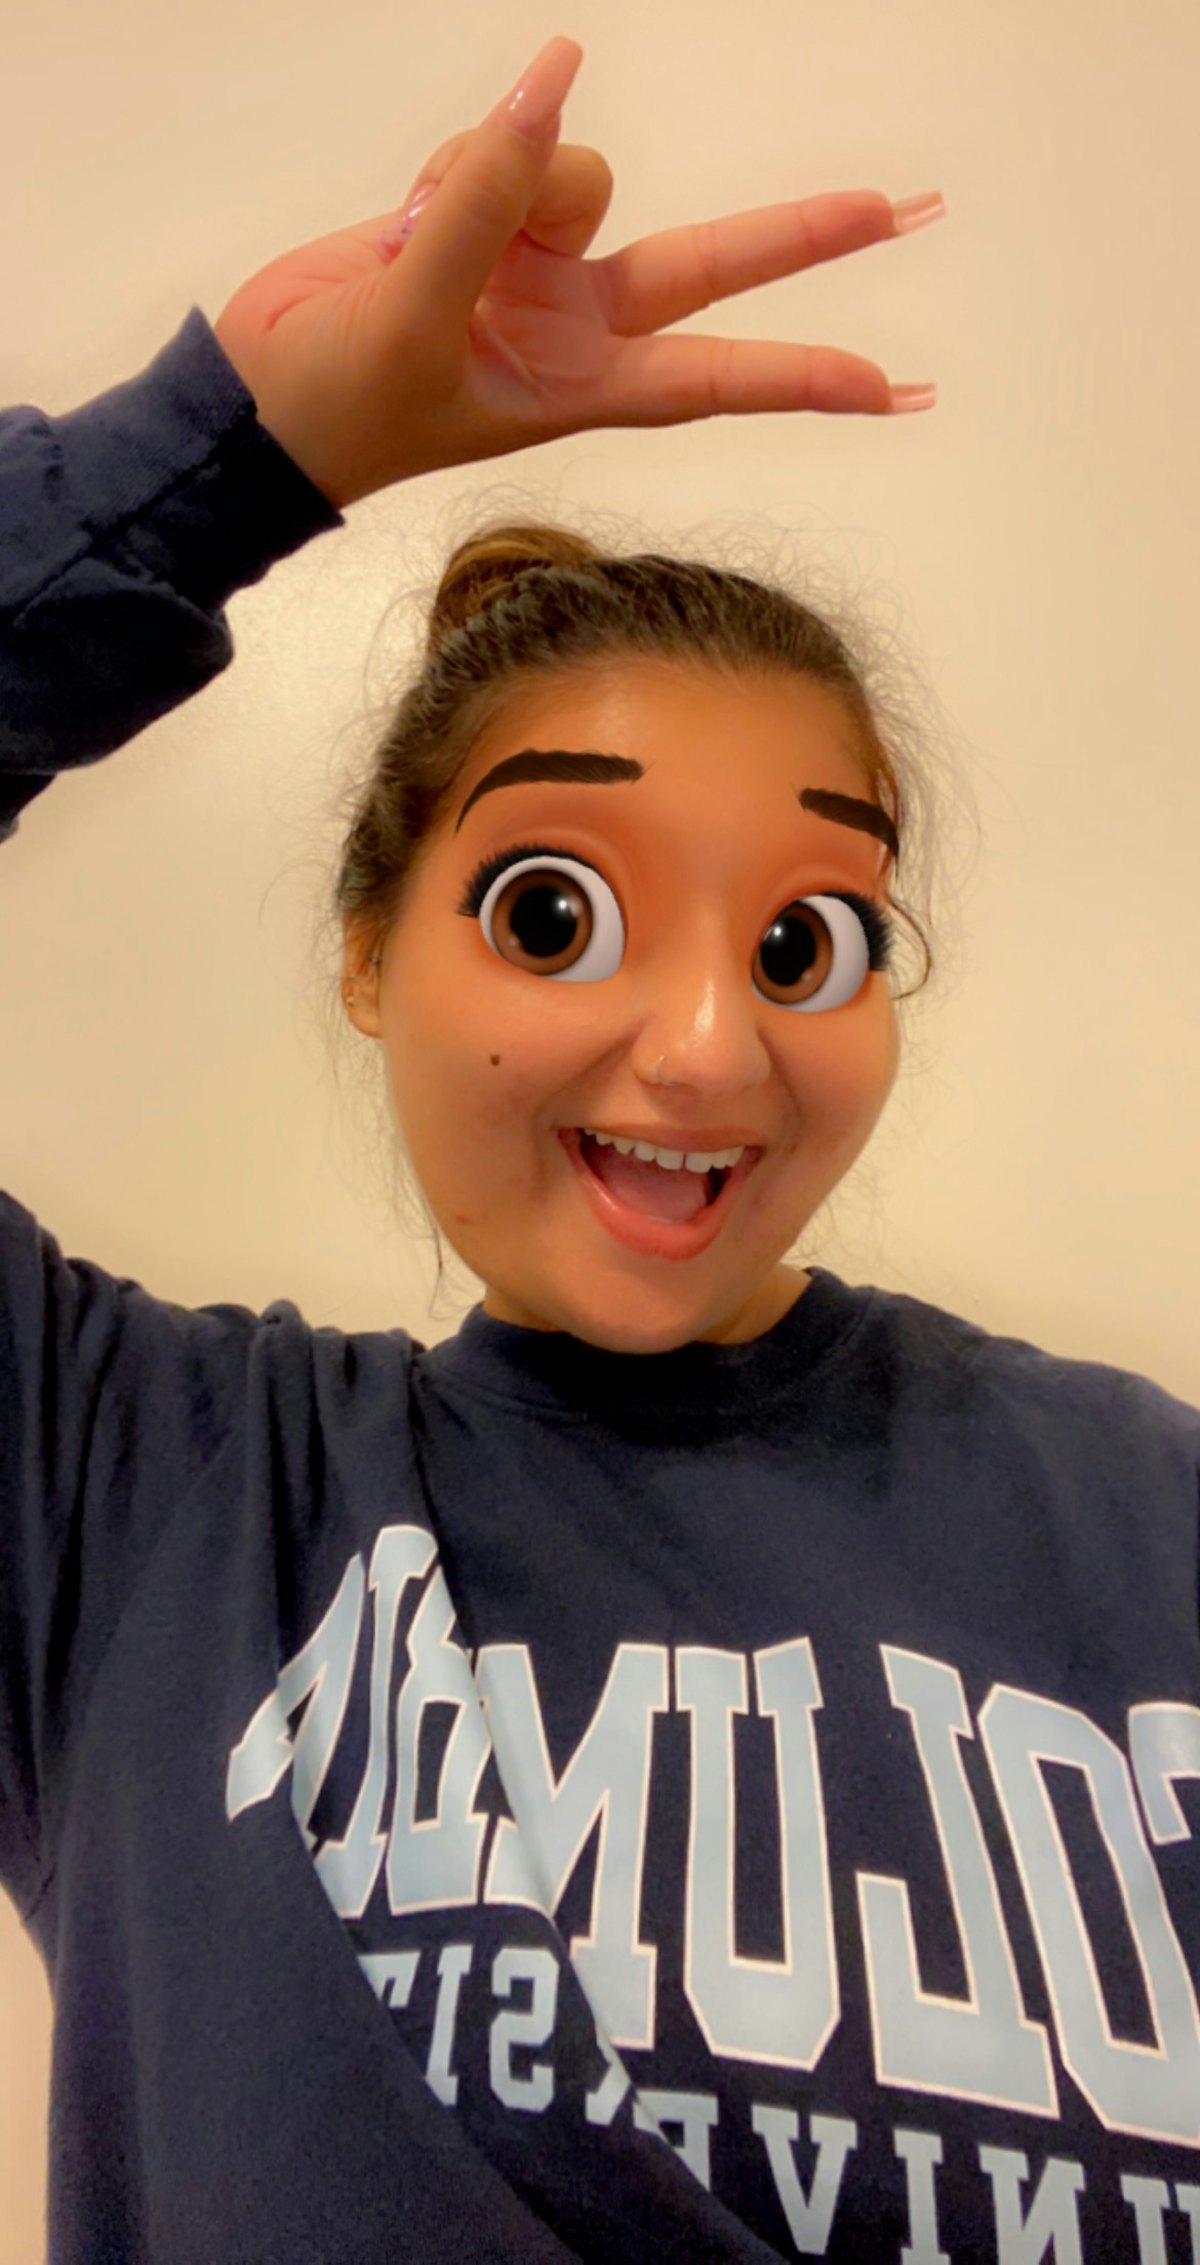 Cartoon Face by Snapchat uses AR effects to cover your eyes with animated ones that look like a Disn...